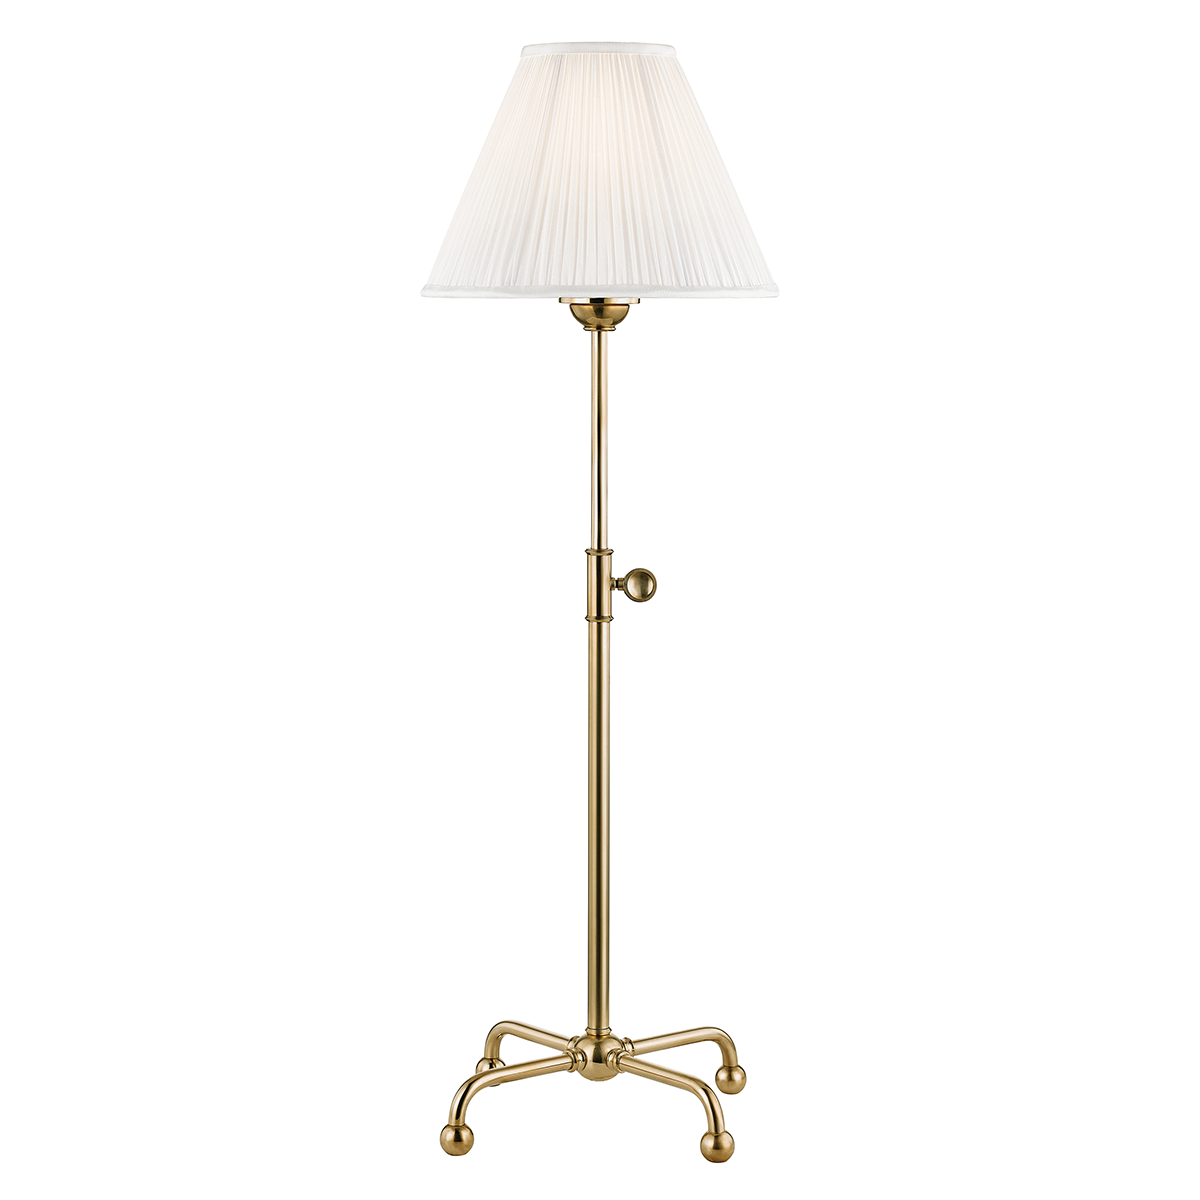 Hudson Valley Lighting Classic No.1 Table Lamp Lamp Hudson Valley Lighting Aged Brass  